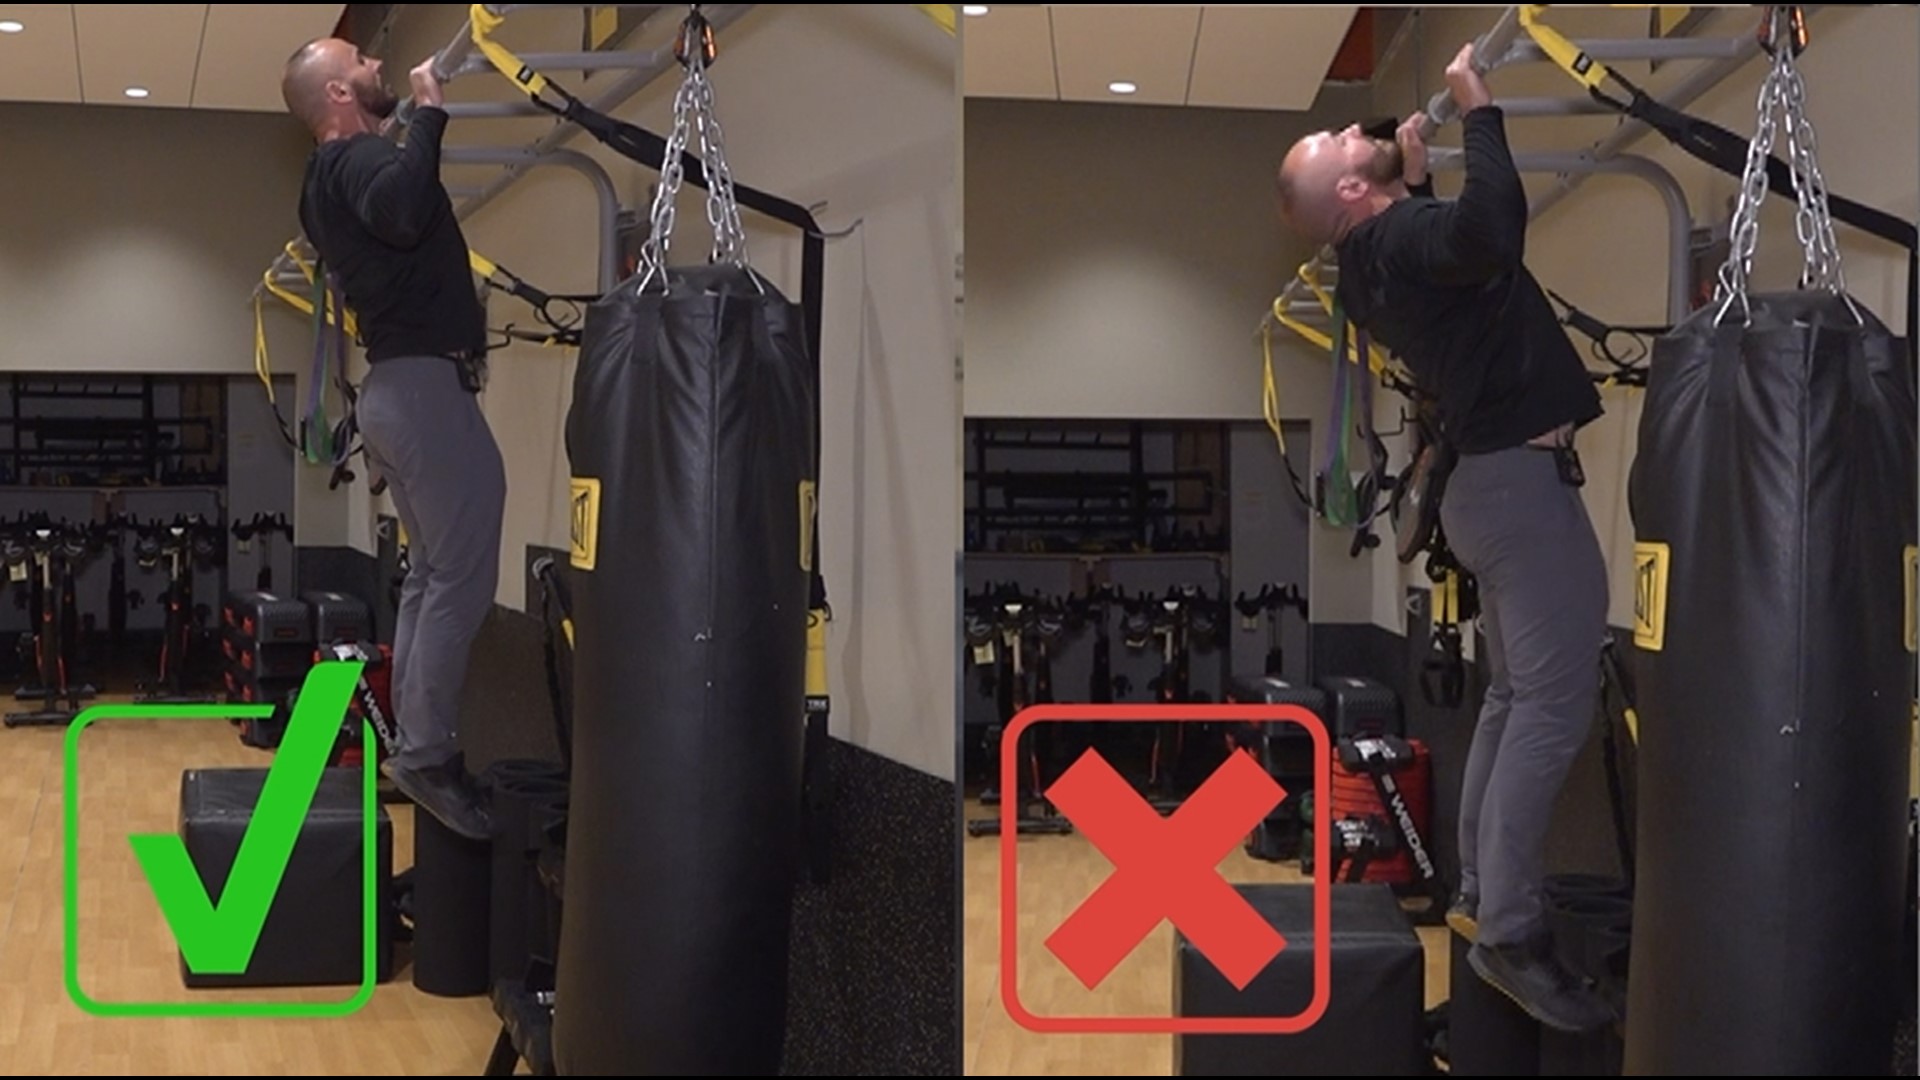 Pull-ups can be one of the hardest, but most rewarding, workout moves to execute. York JCC trainer Danny give us tips to build our muscles up to more reps!